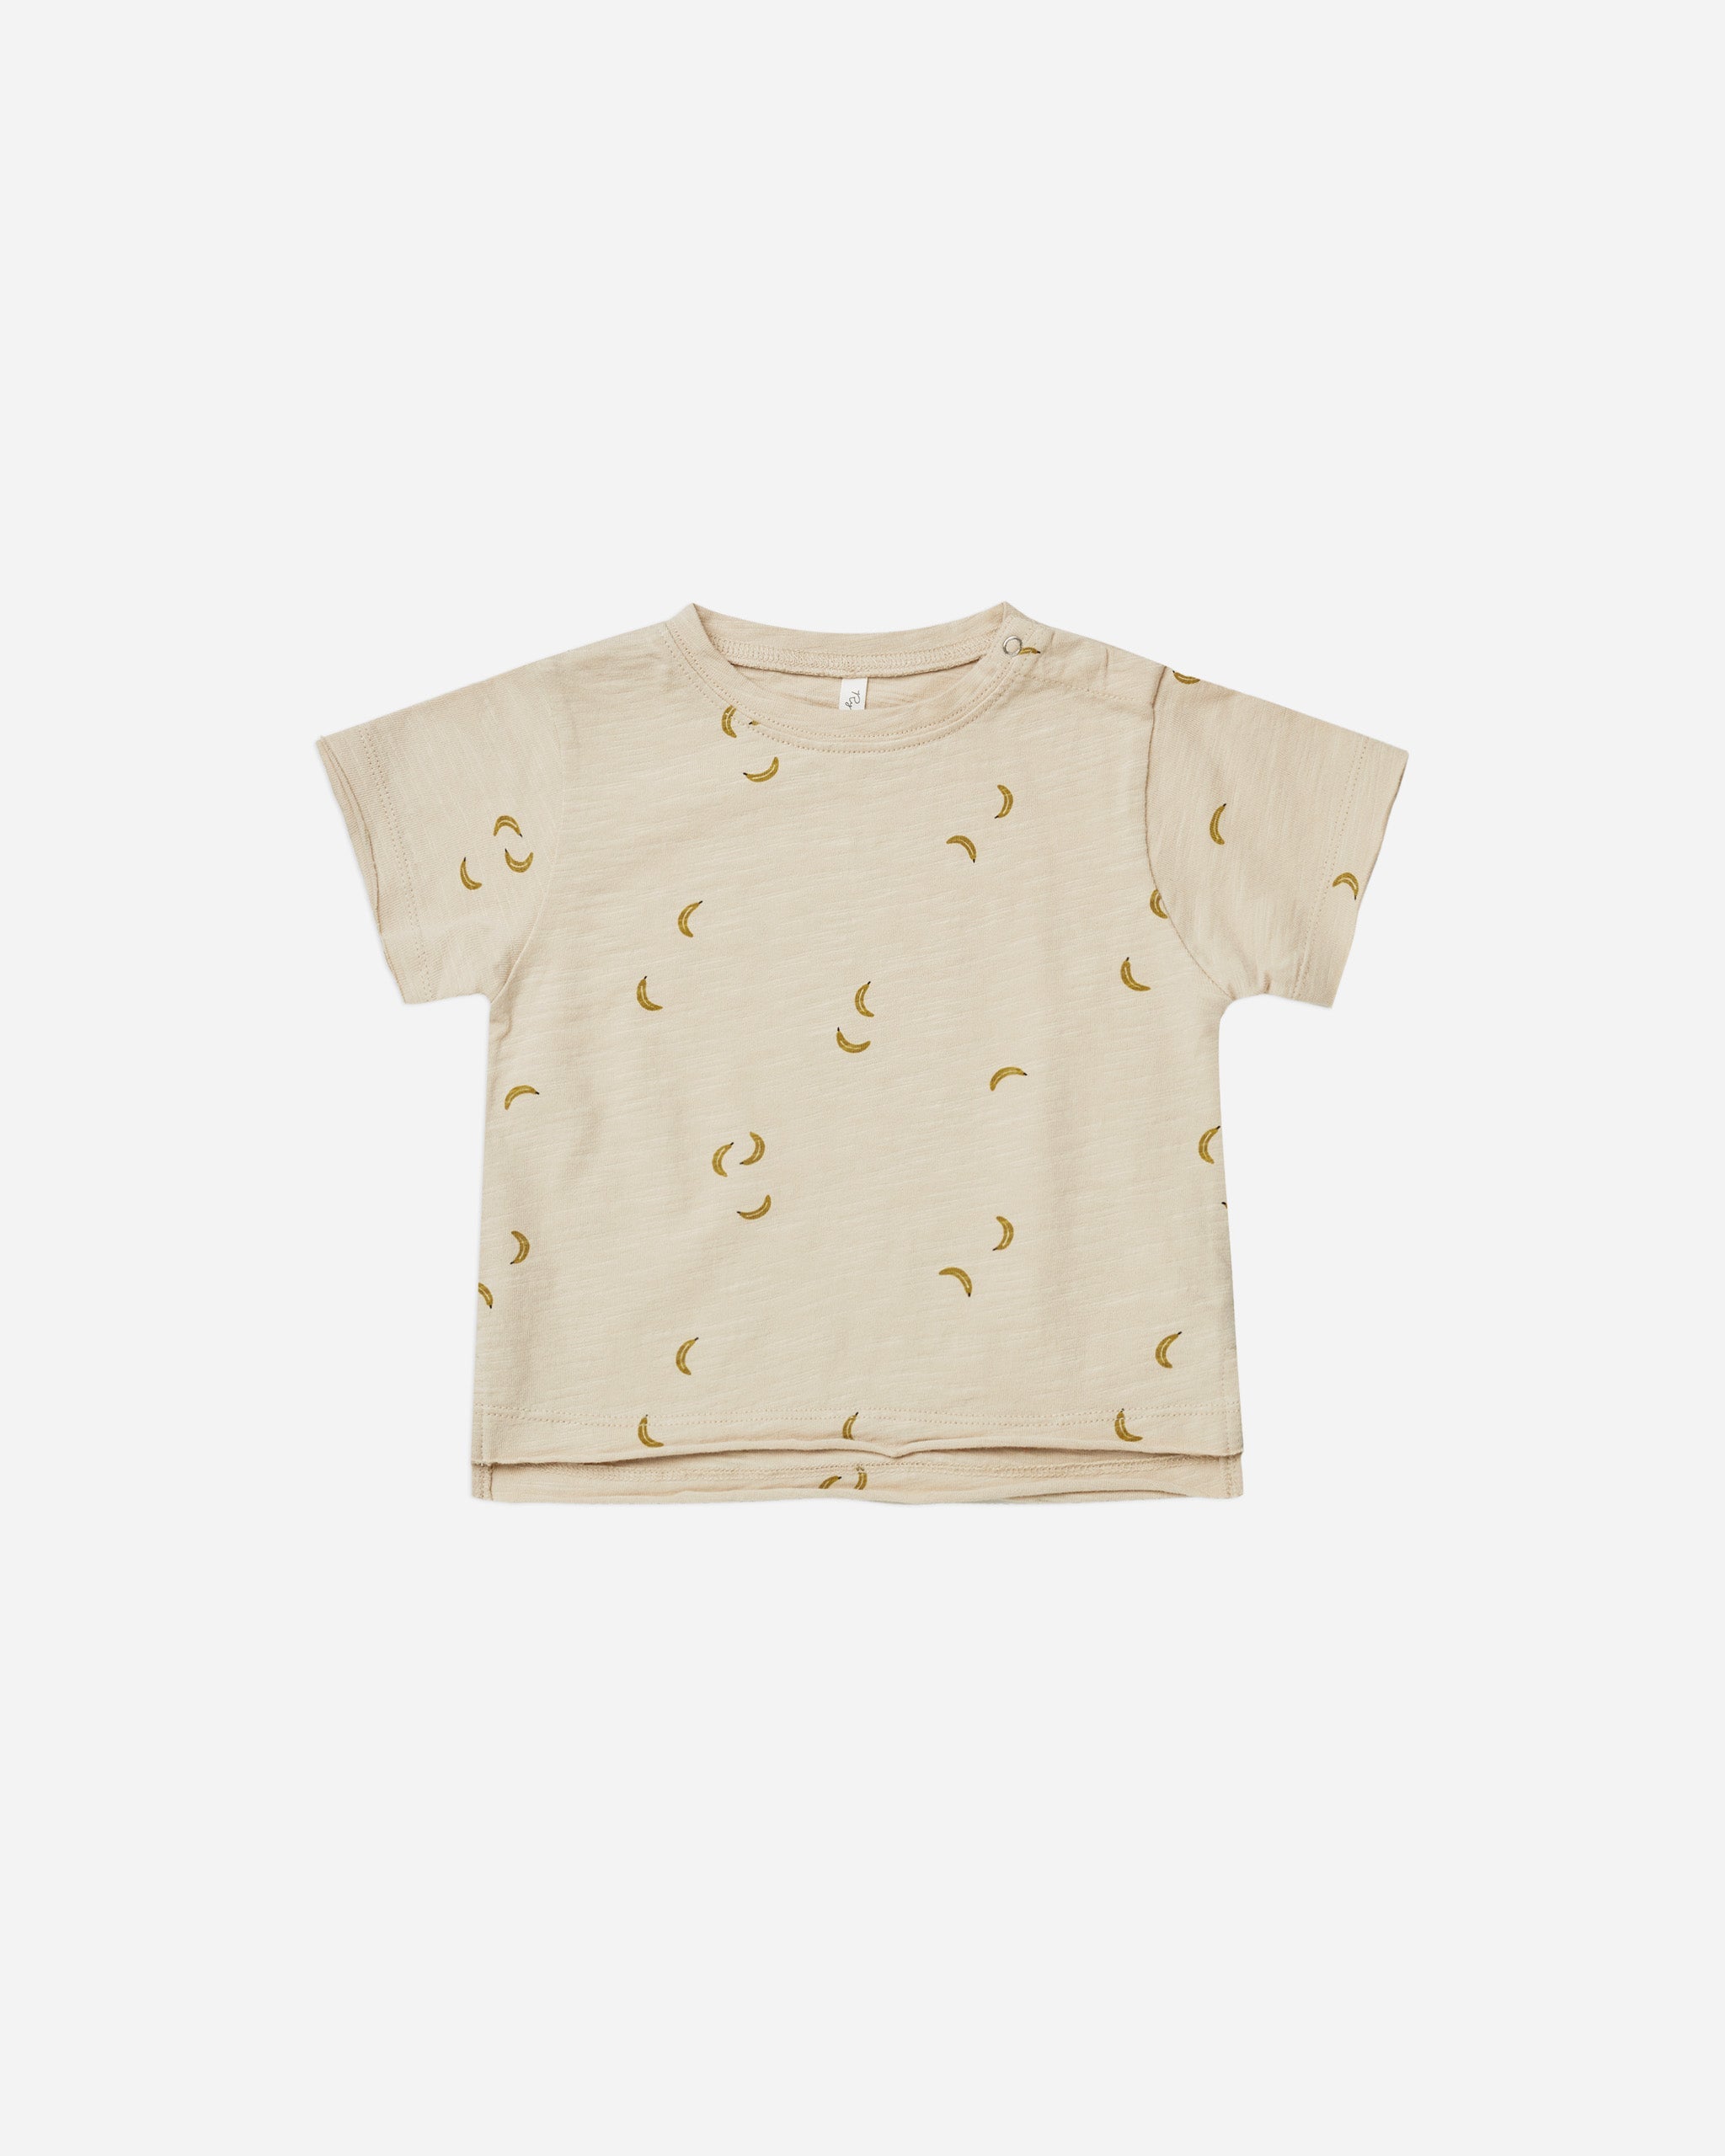 raw edge tee || bananas - Rylee + Cru | Kids Clothes | Trendy Baby Clothes | Modern Infant Outfits |